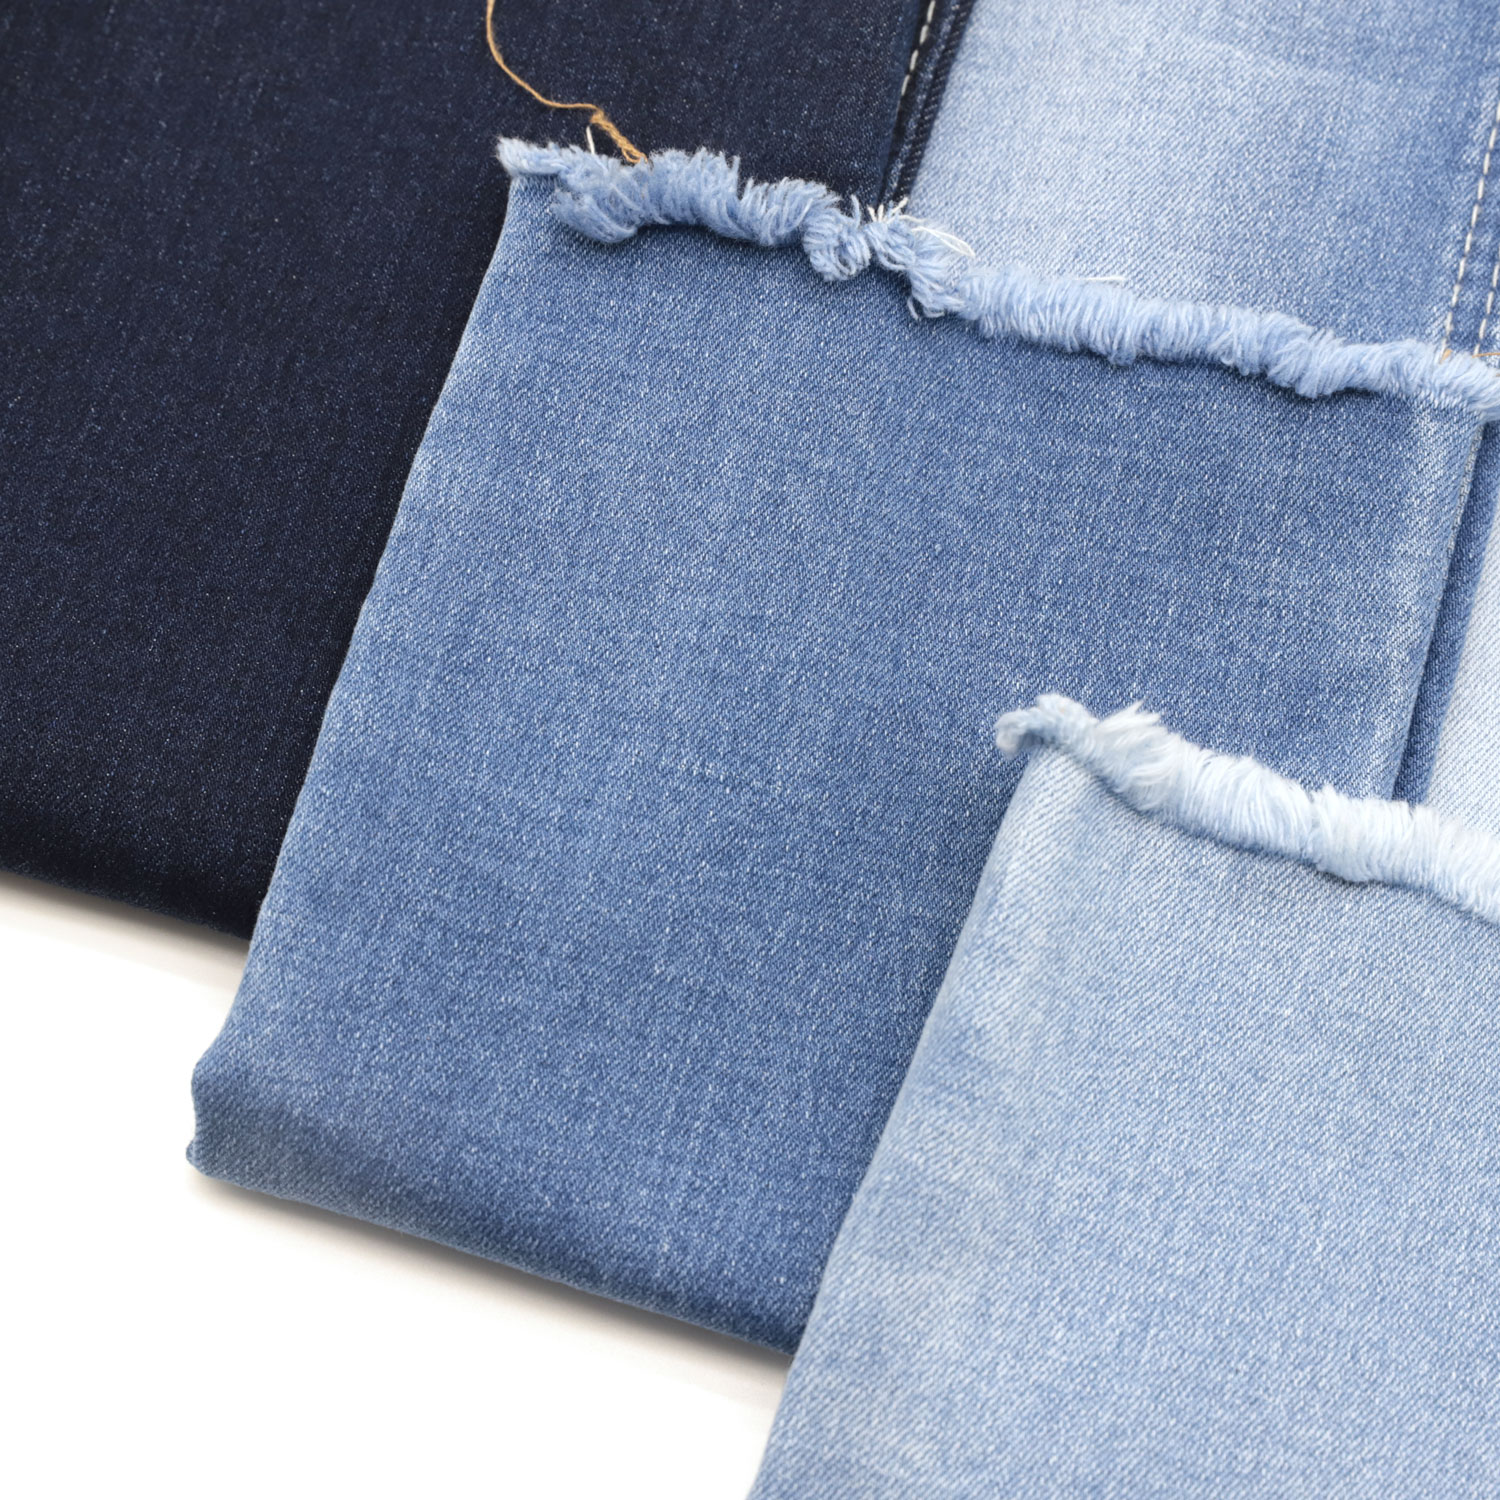 Tips to Clean Stainless Twill Denim Fabric 1